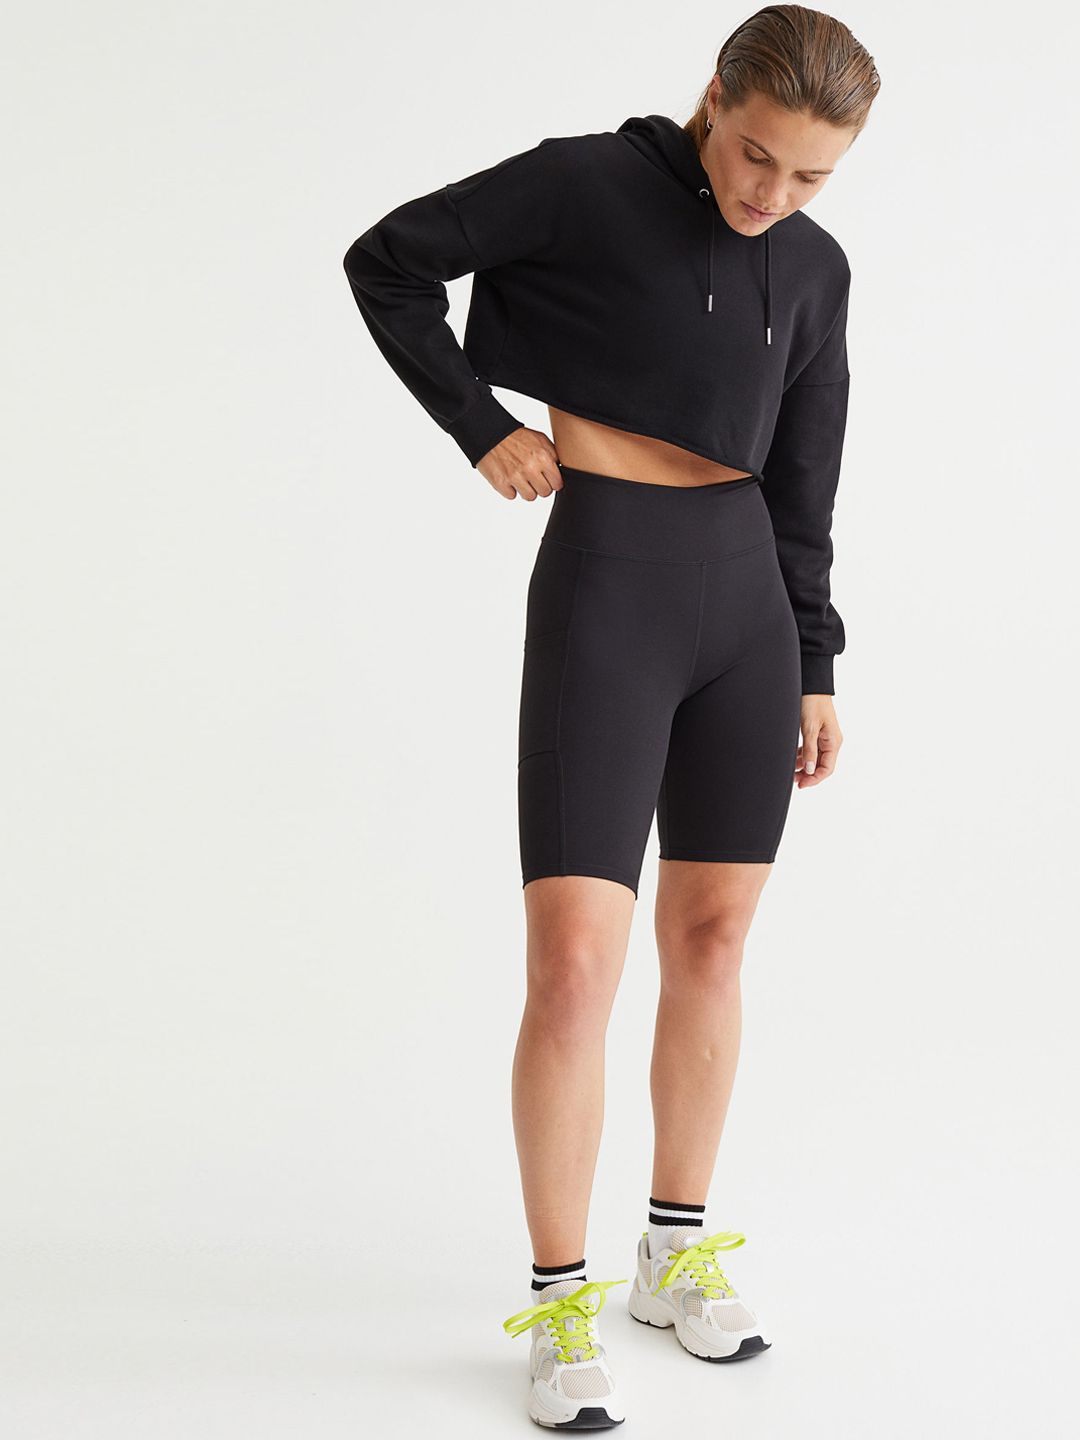 H&M Women Black Sports Cycling Shorts Price in India